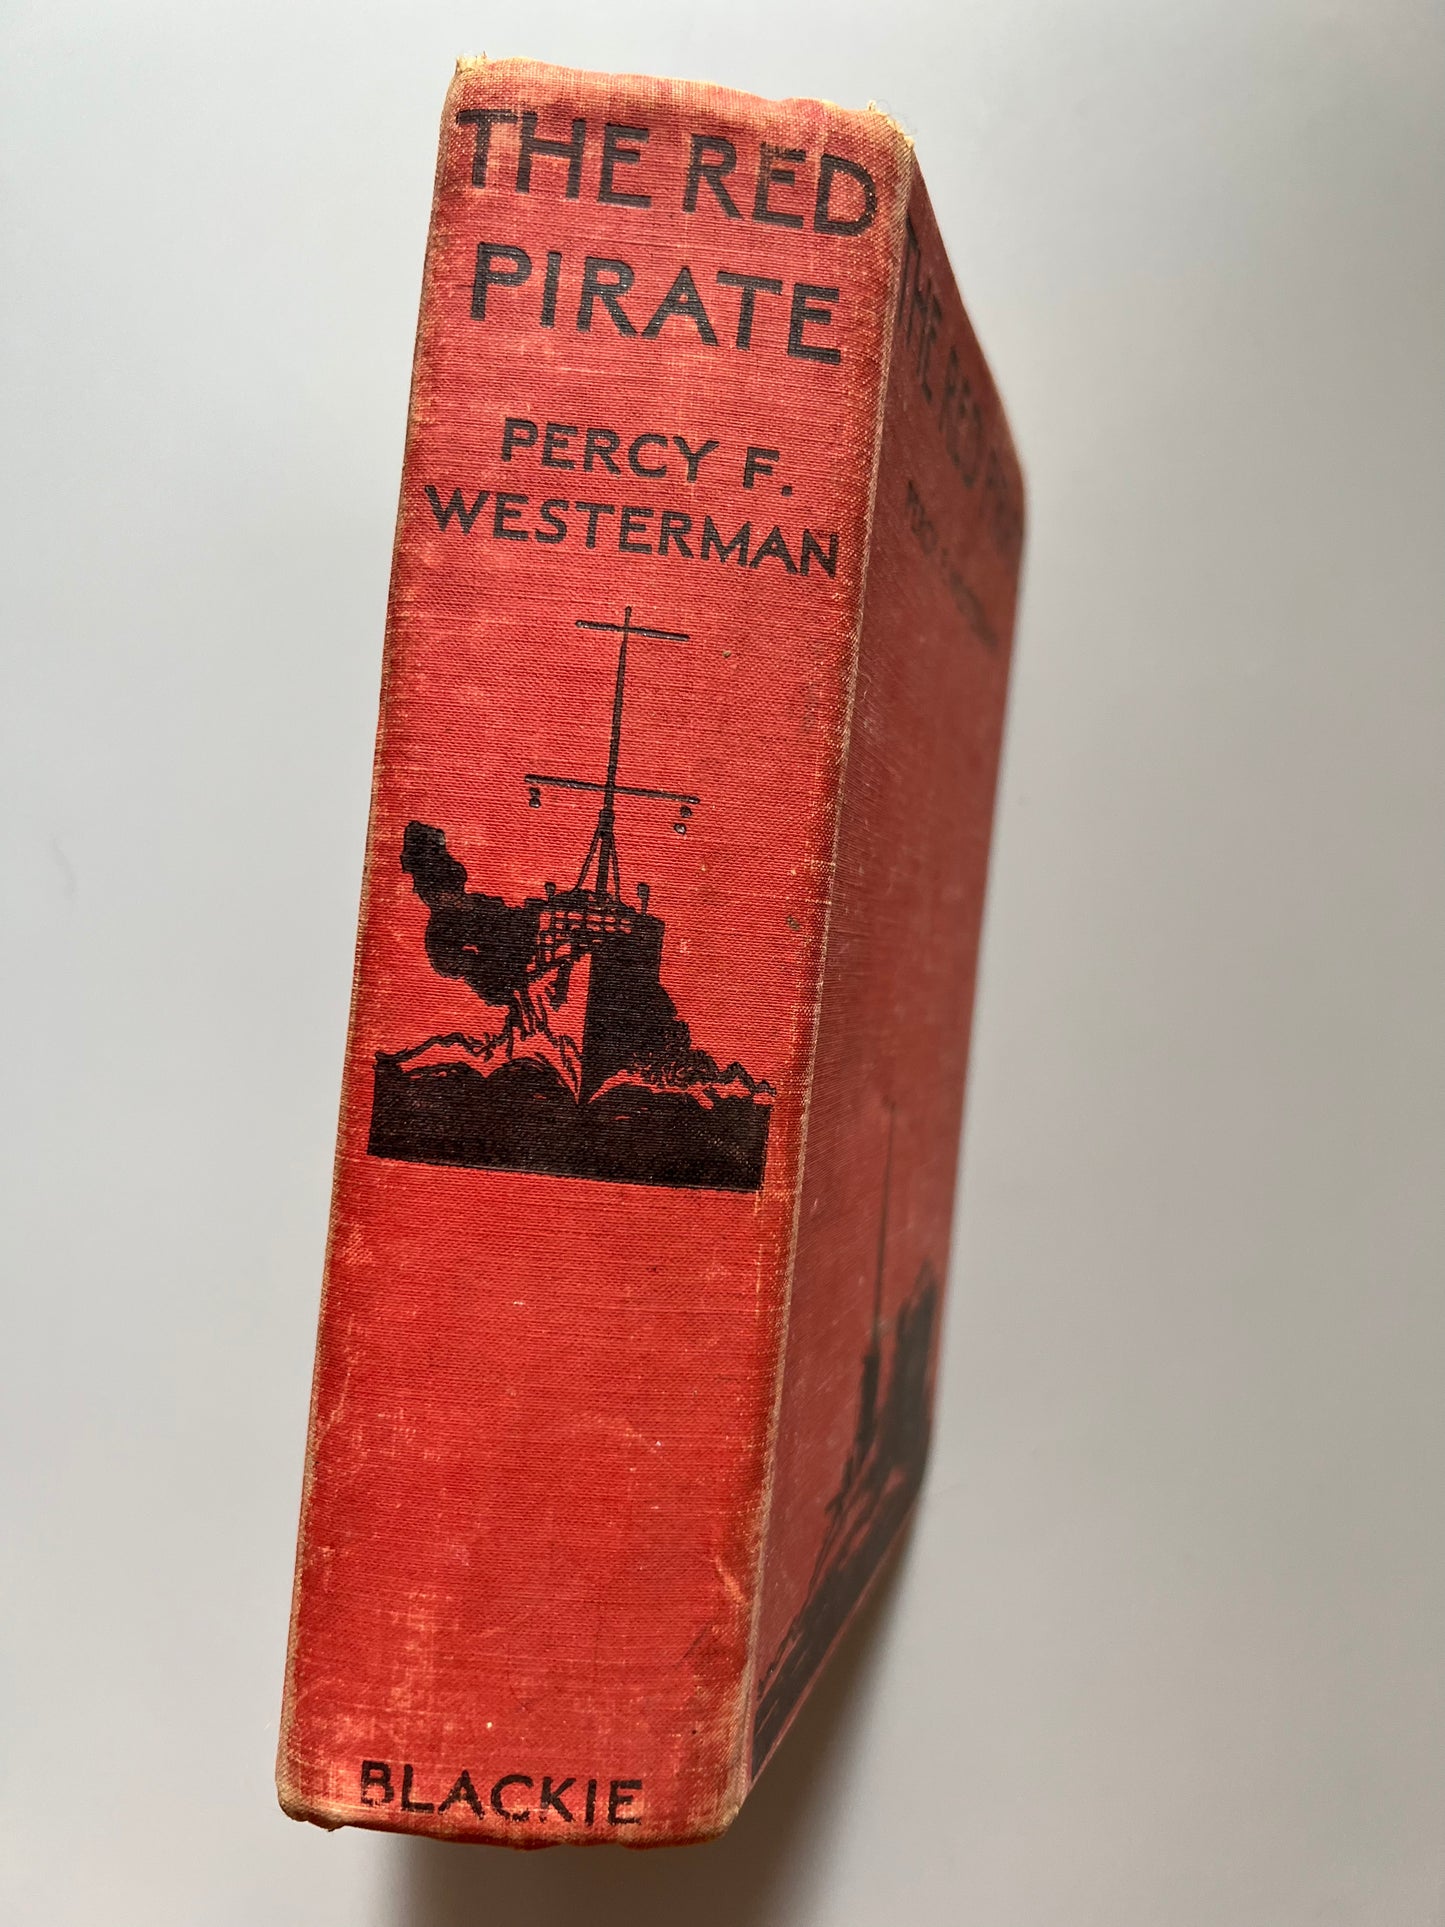 The red pirate, Percy F. Westerman - Blackie & Son, ca. 1920